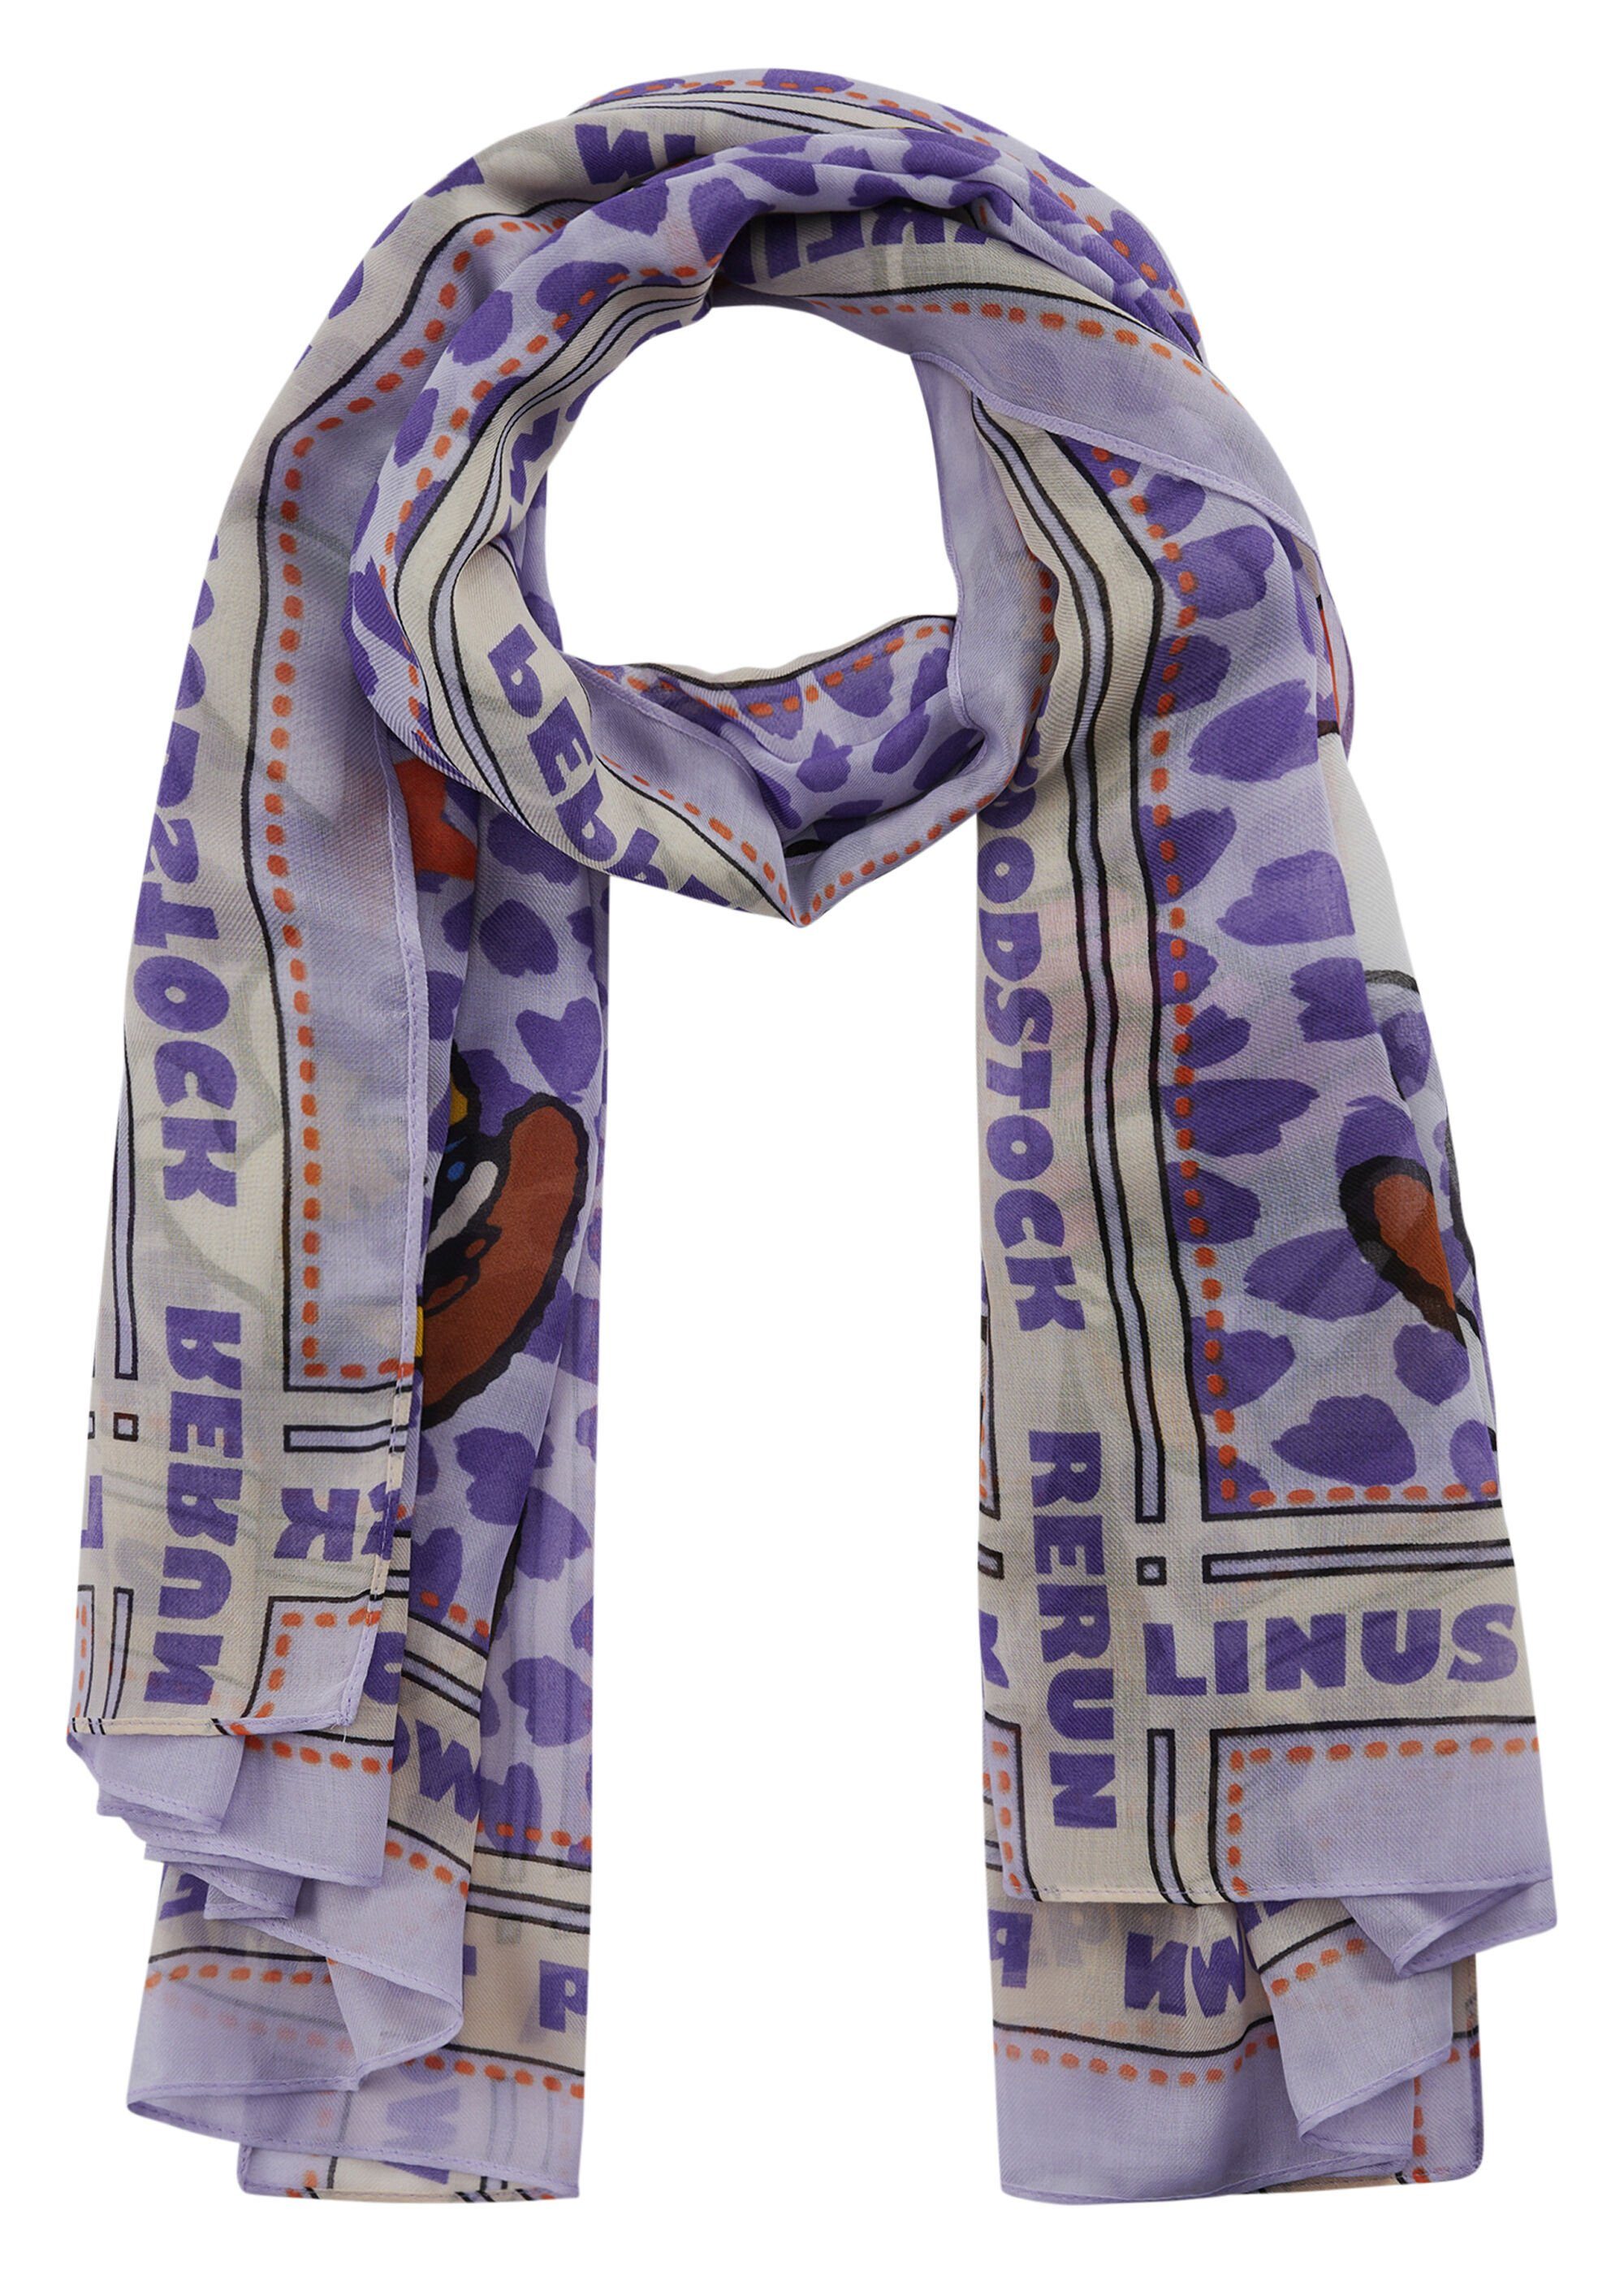 Polyester aus recyceltem lilac PEANUTS, Modeschal Codello